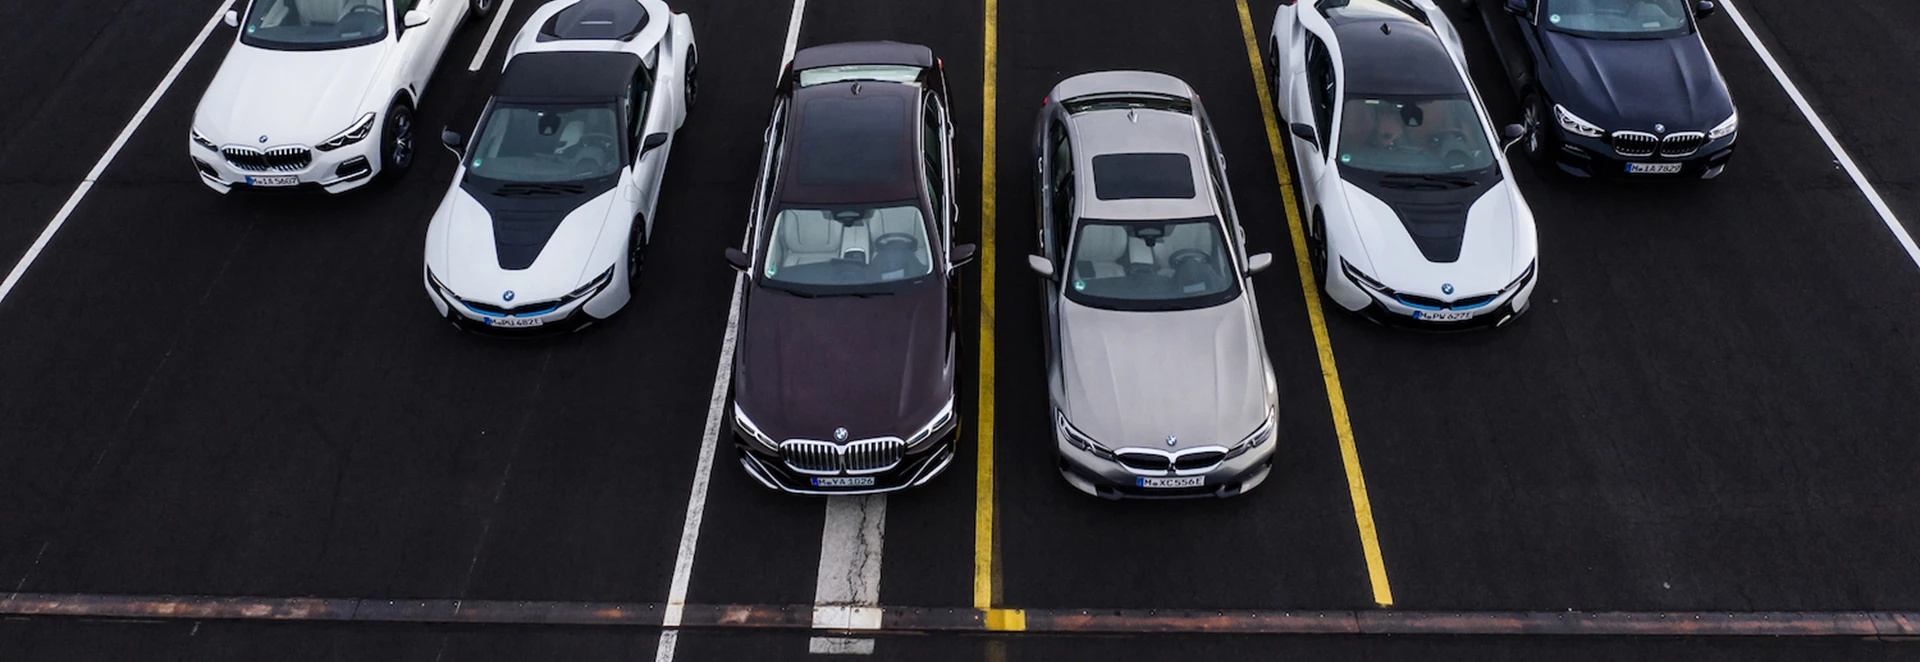 How many electrified vehicles did BMW Group sell in 2018?